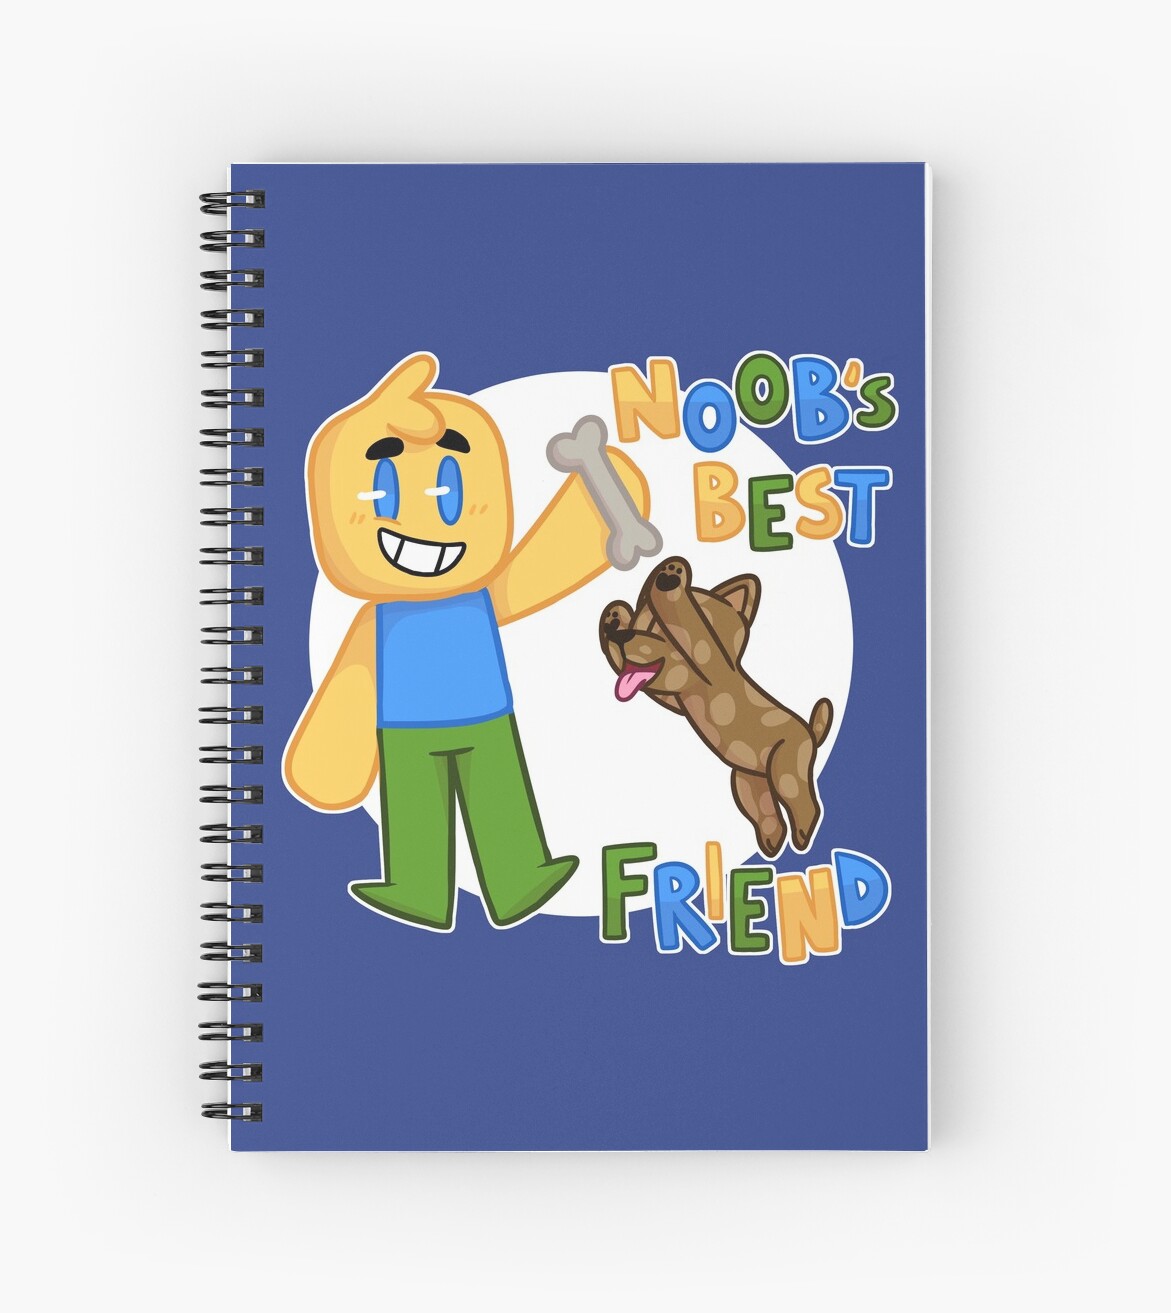 Noobs Best Friend Roblox Noob With Dog Roblox Inspired T Shirt Spiral Notebook By Smoothnoob - blue dog shirt roblox